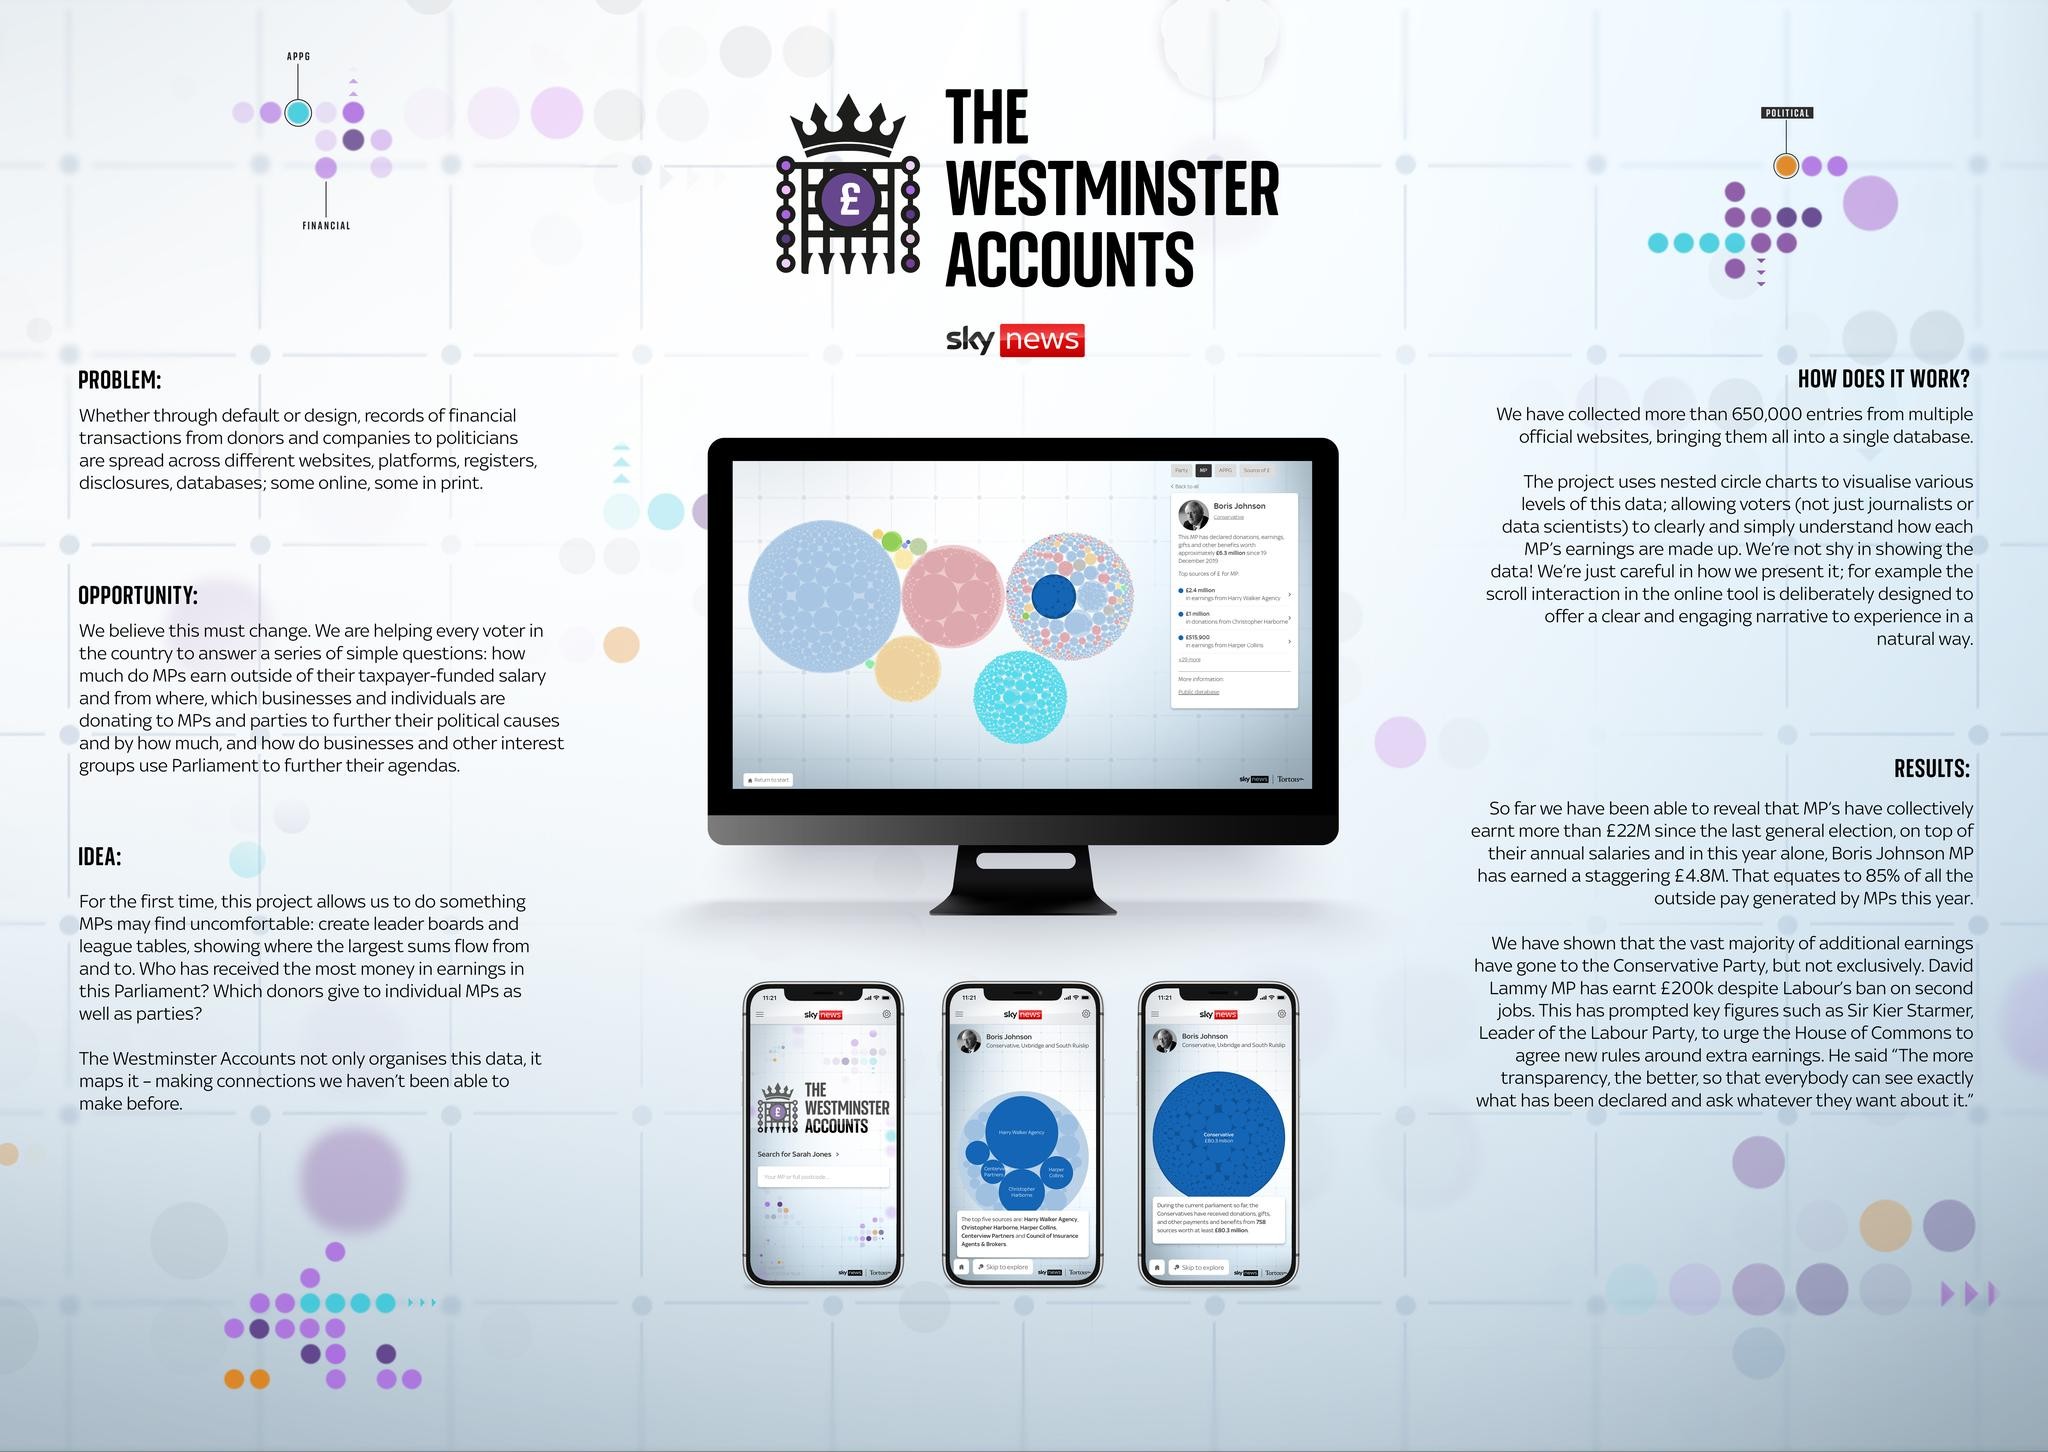 The Westminister Accounts